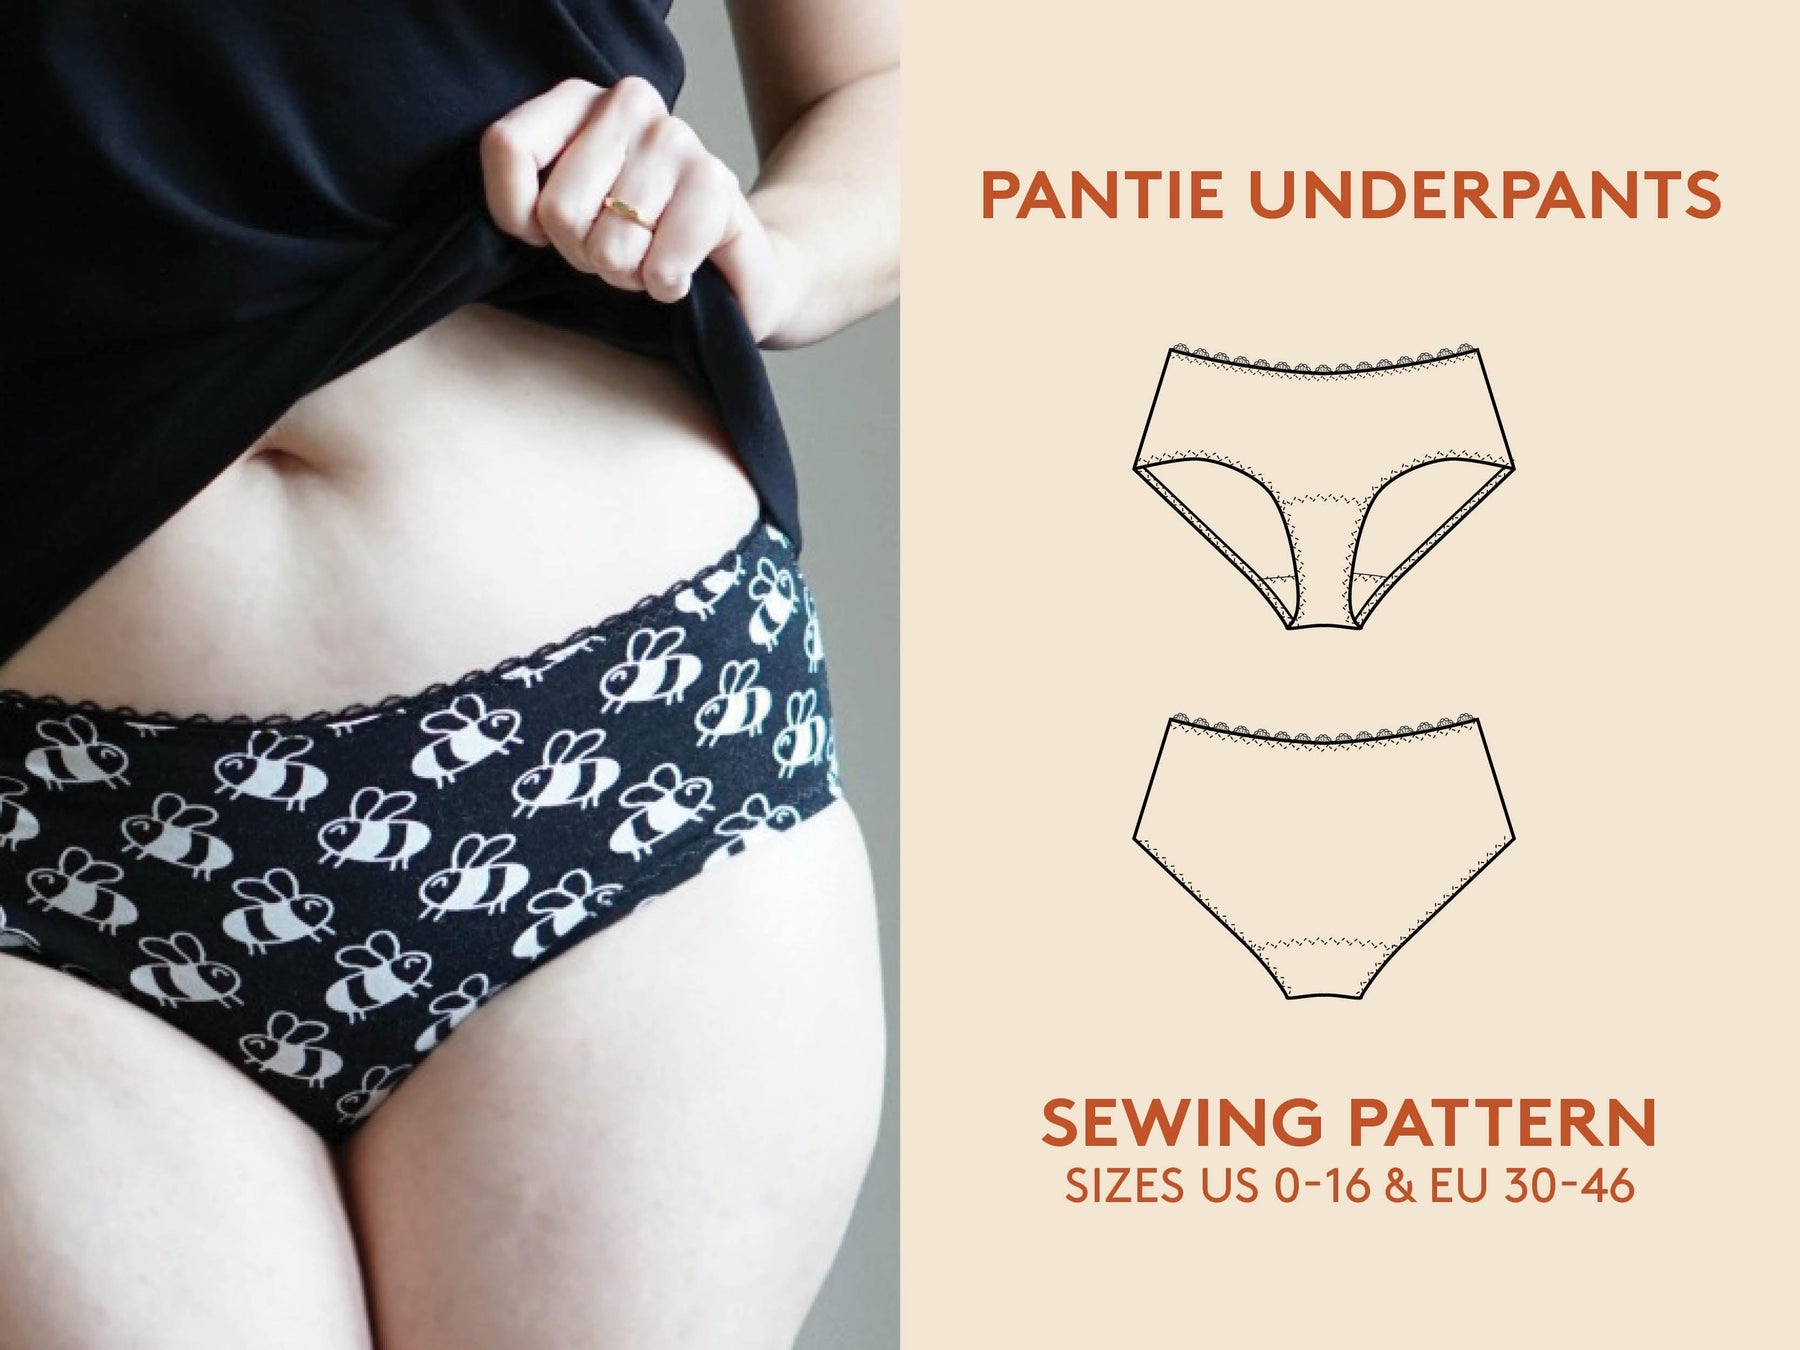 Free Underwear Sewing Patterns (Sew Your Own Panties) - Easy